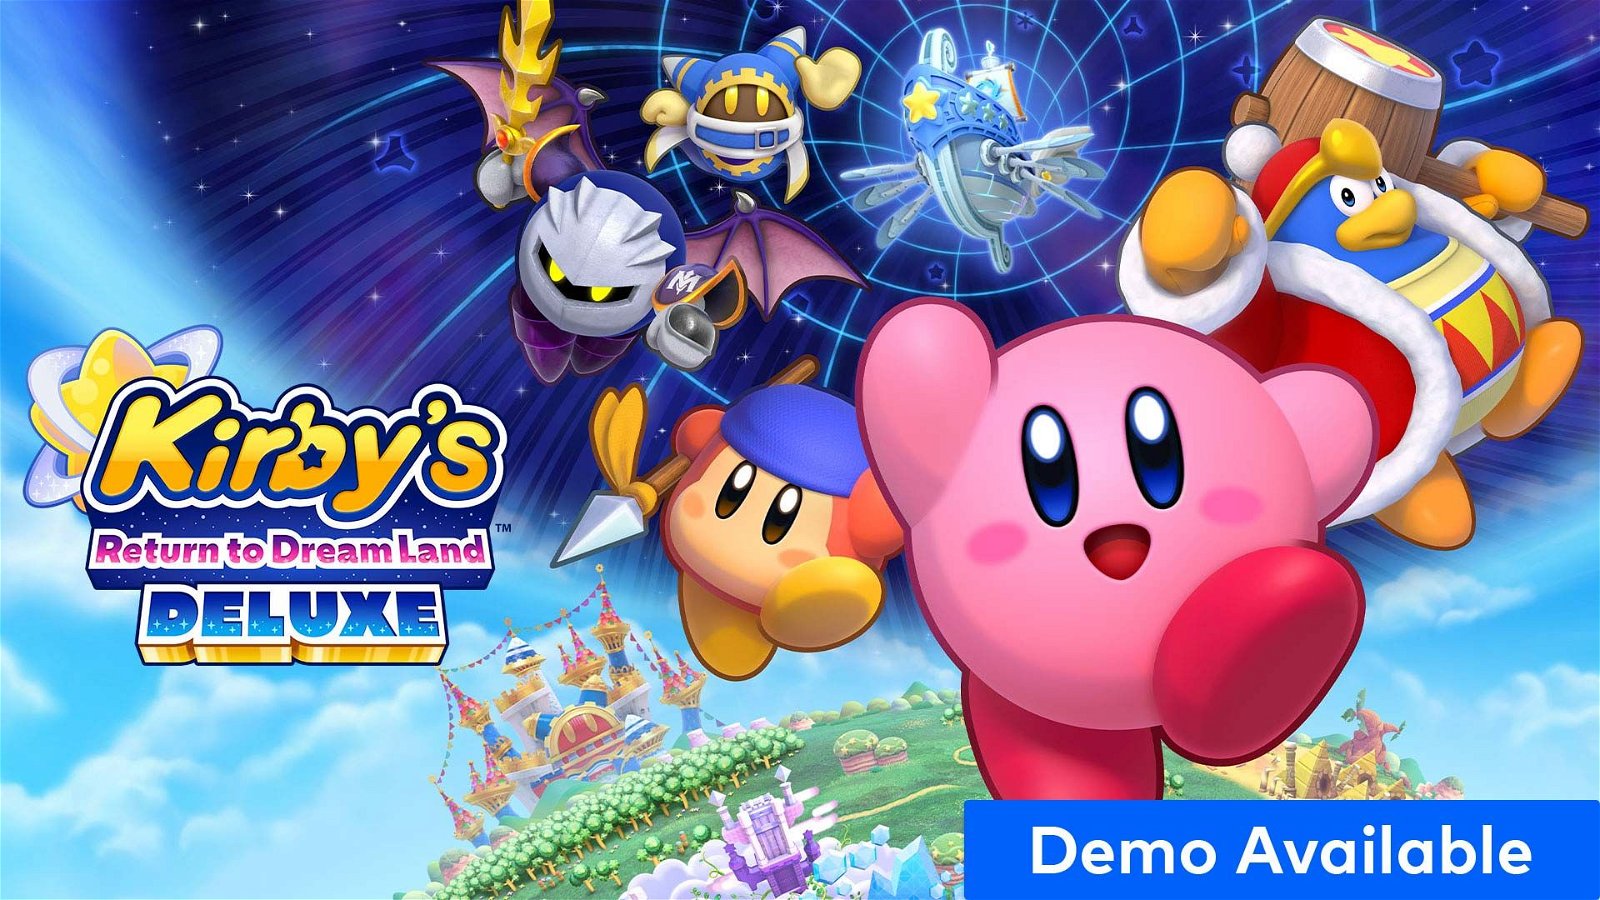 Image of Kirby’s Return to Dream Land Deluxe